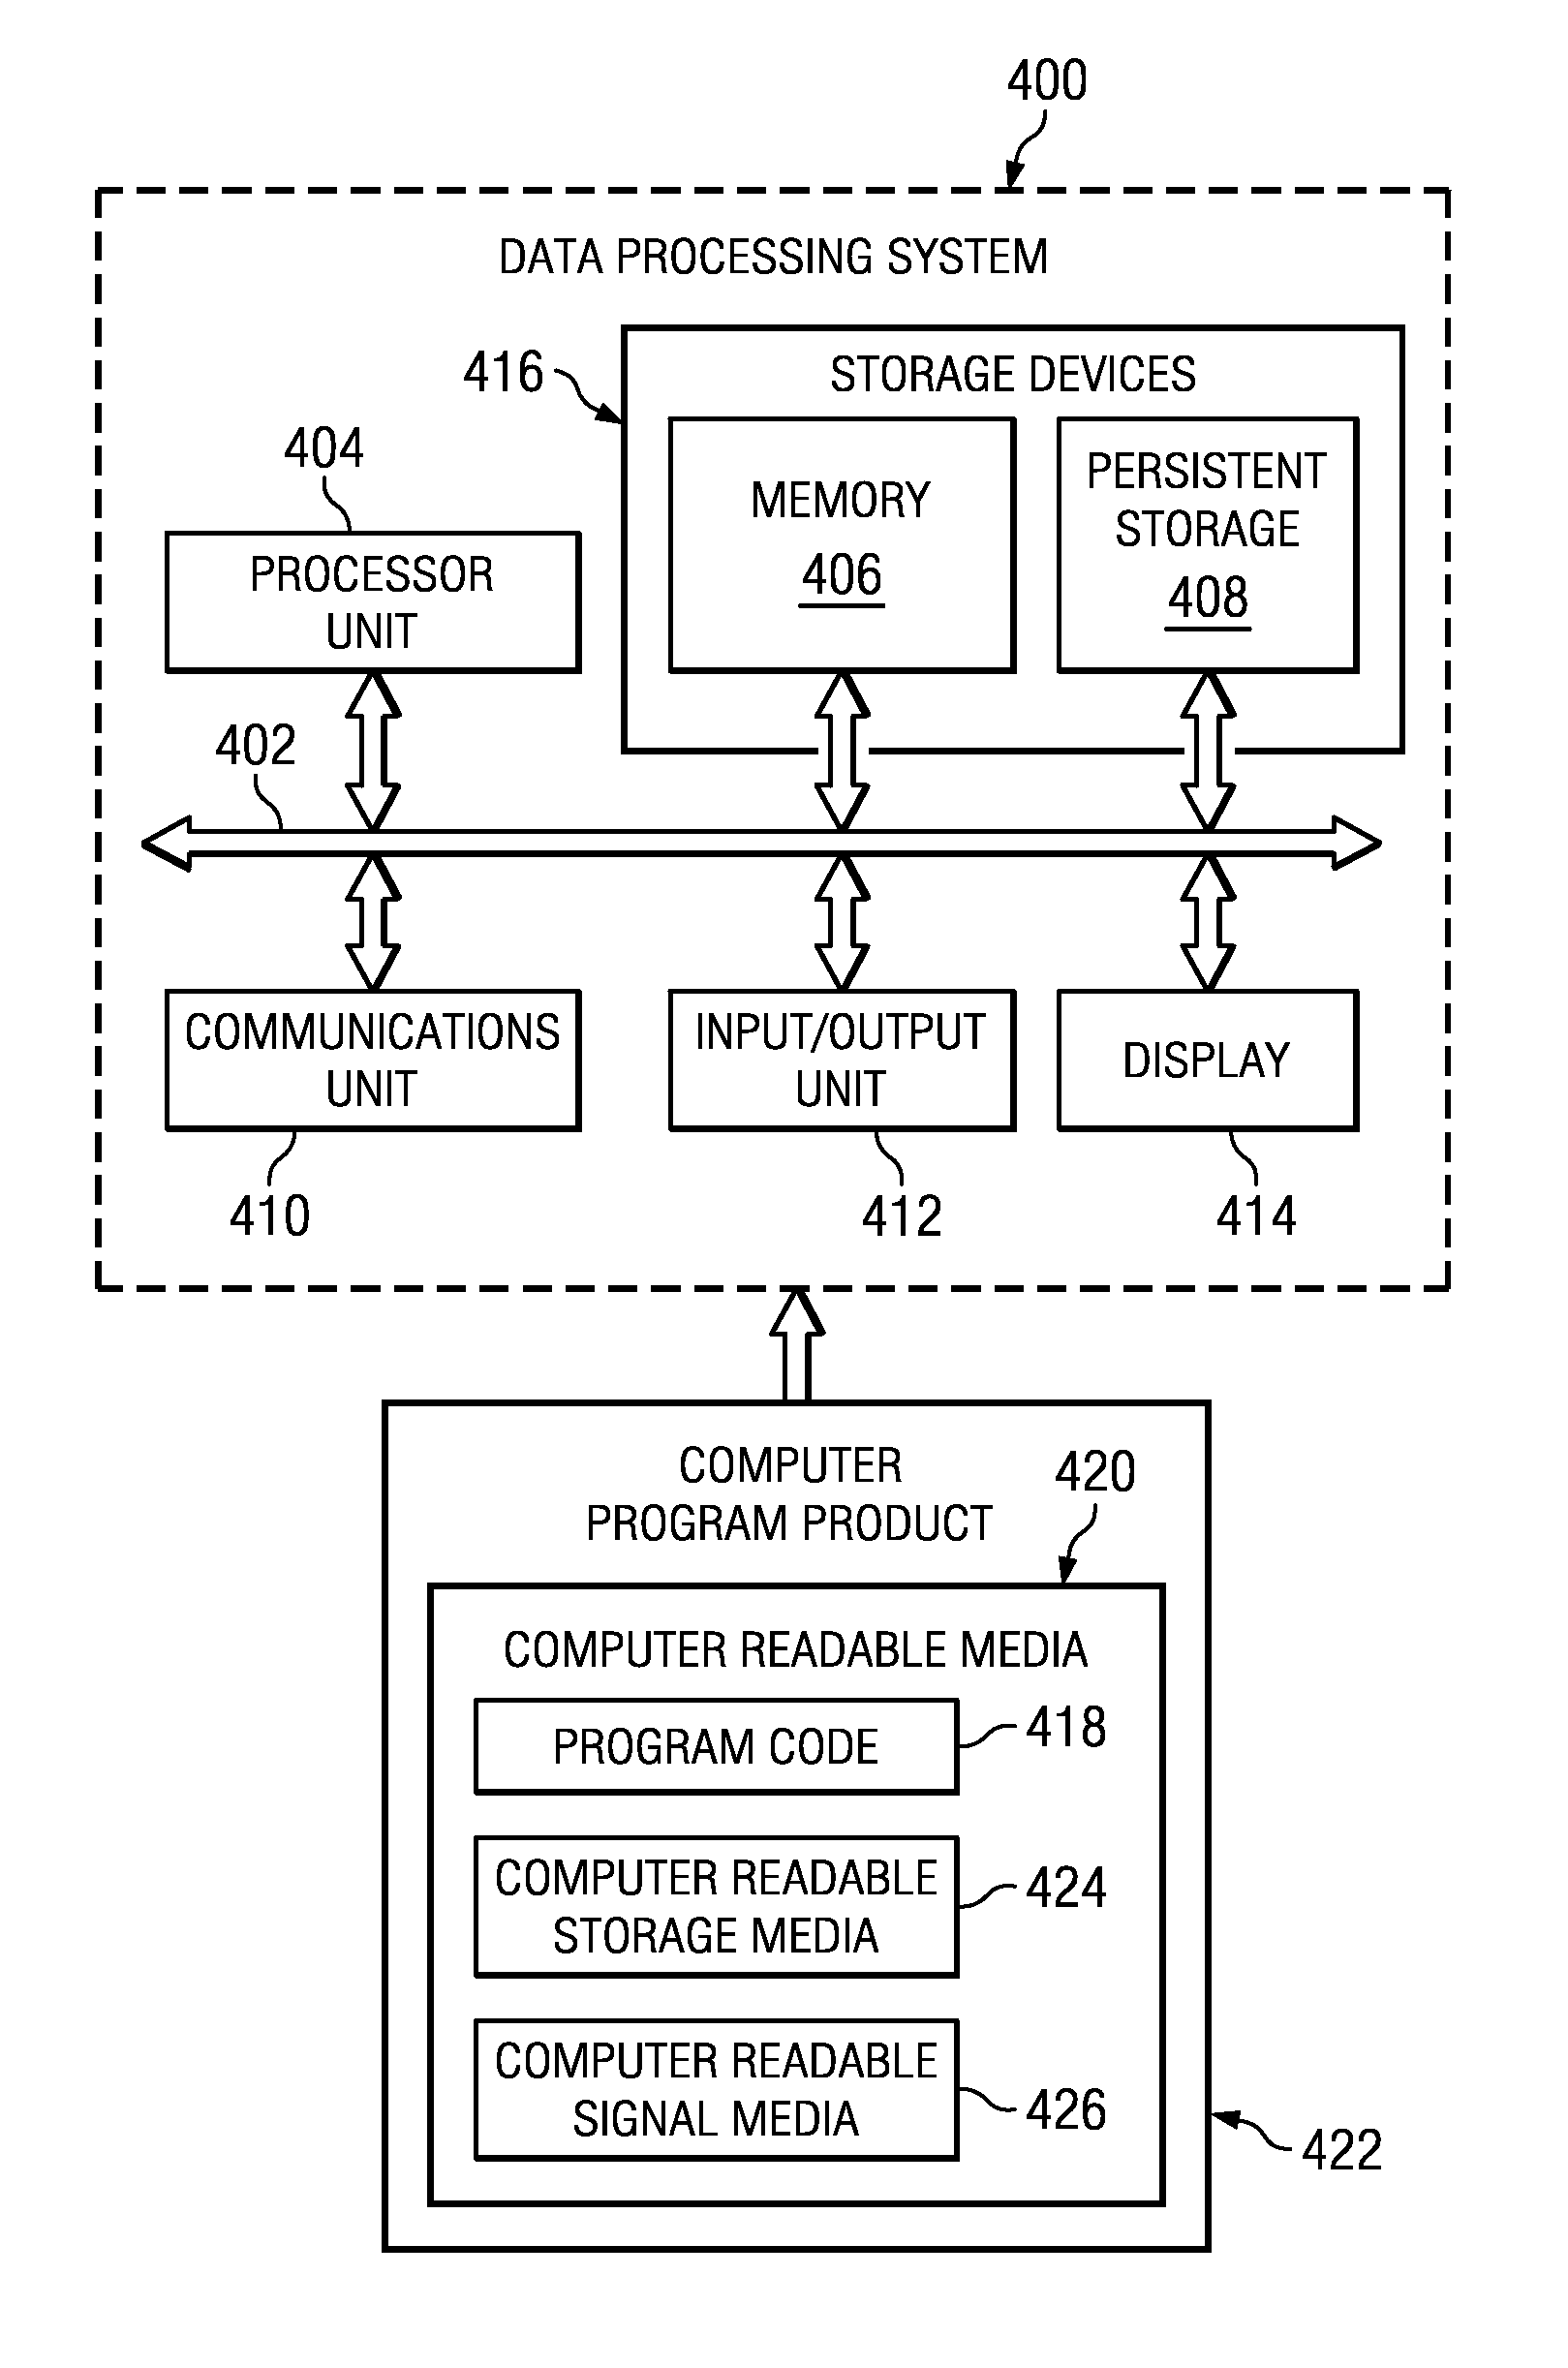 Method and system to predict detectability and identify foreign objects